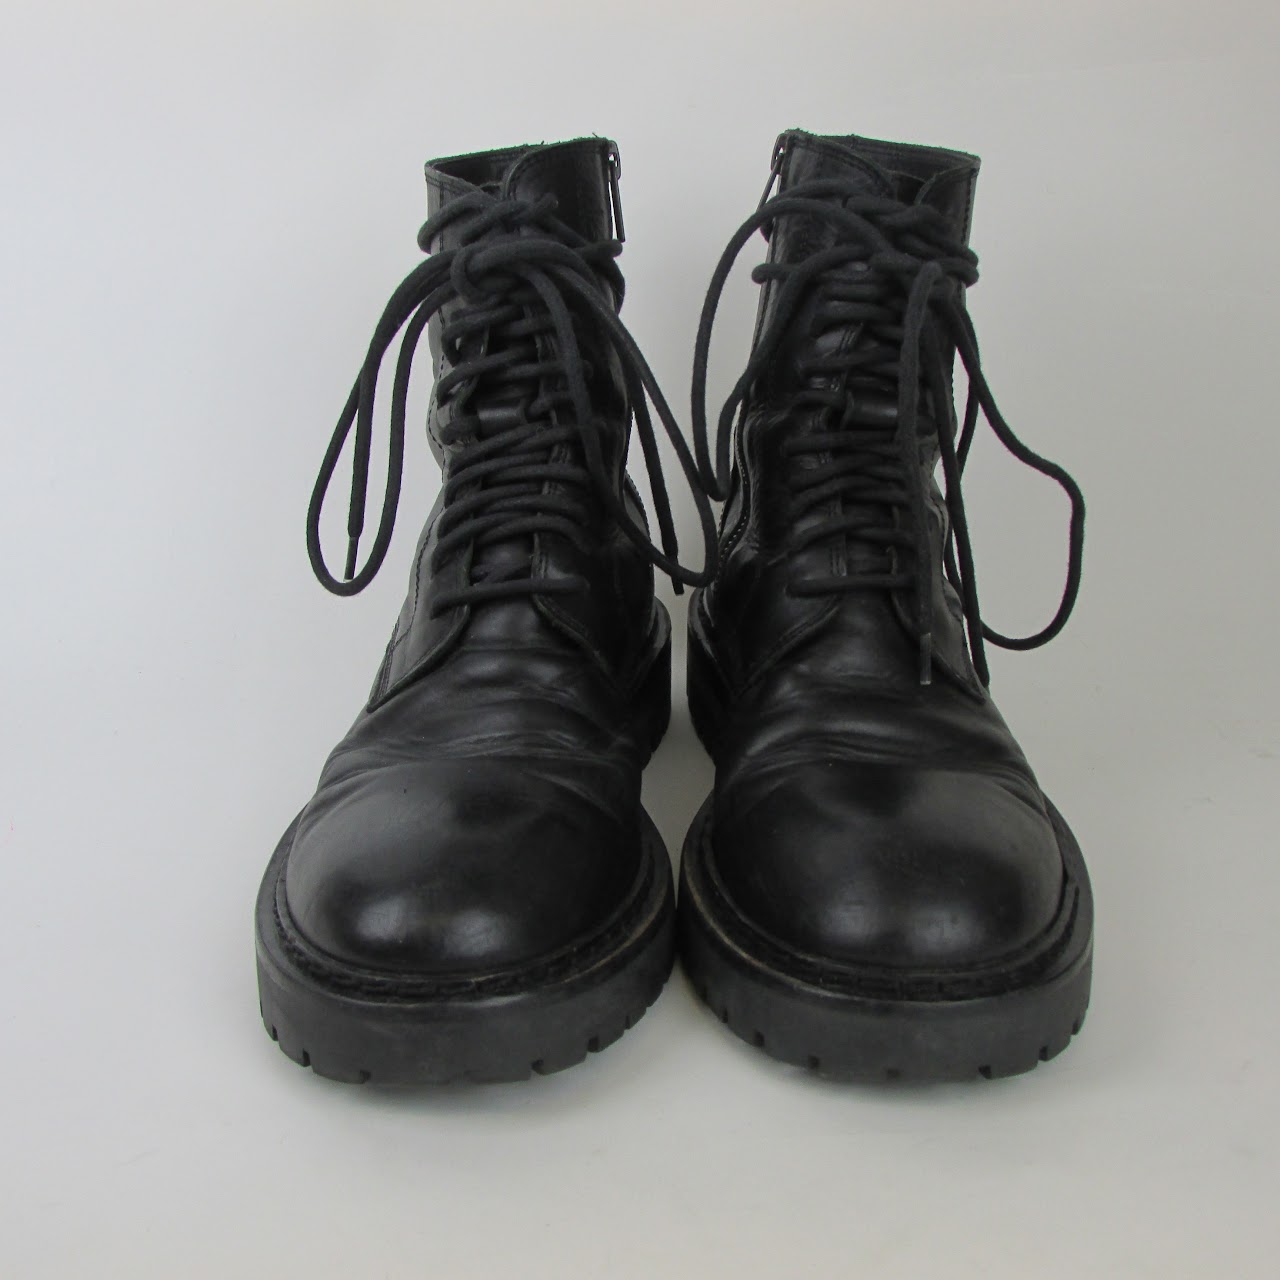 Ann Demeulemeester Lace-Up Boots